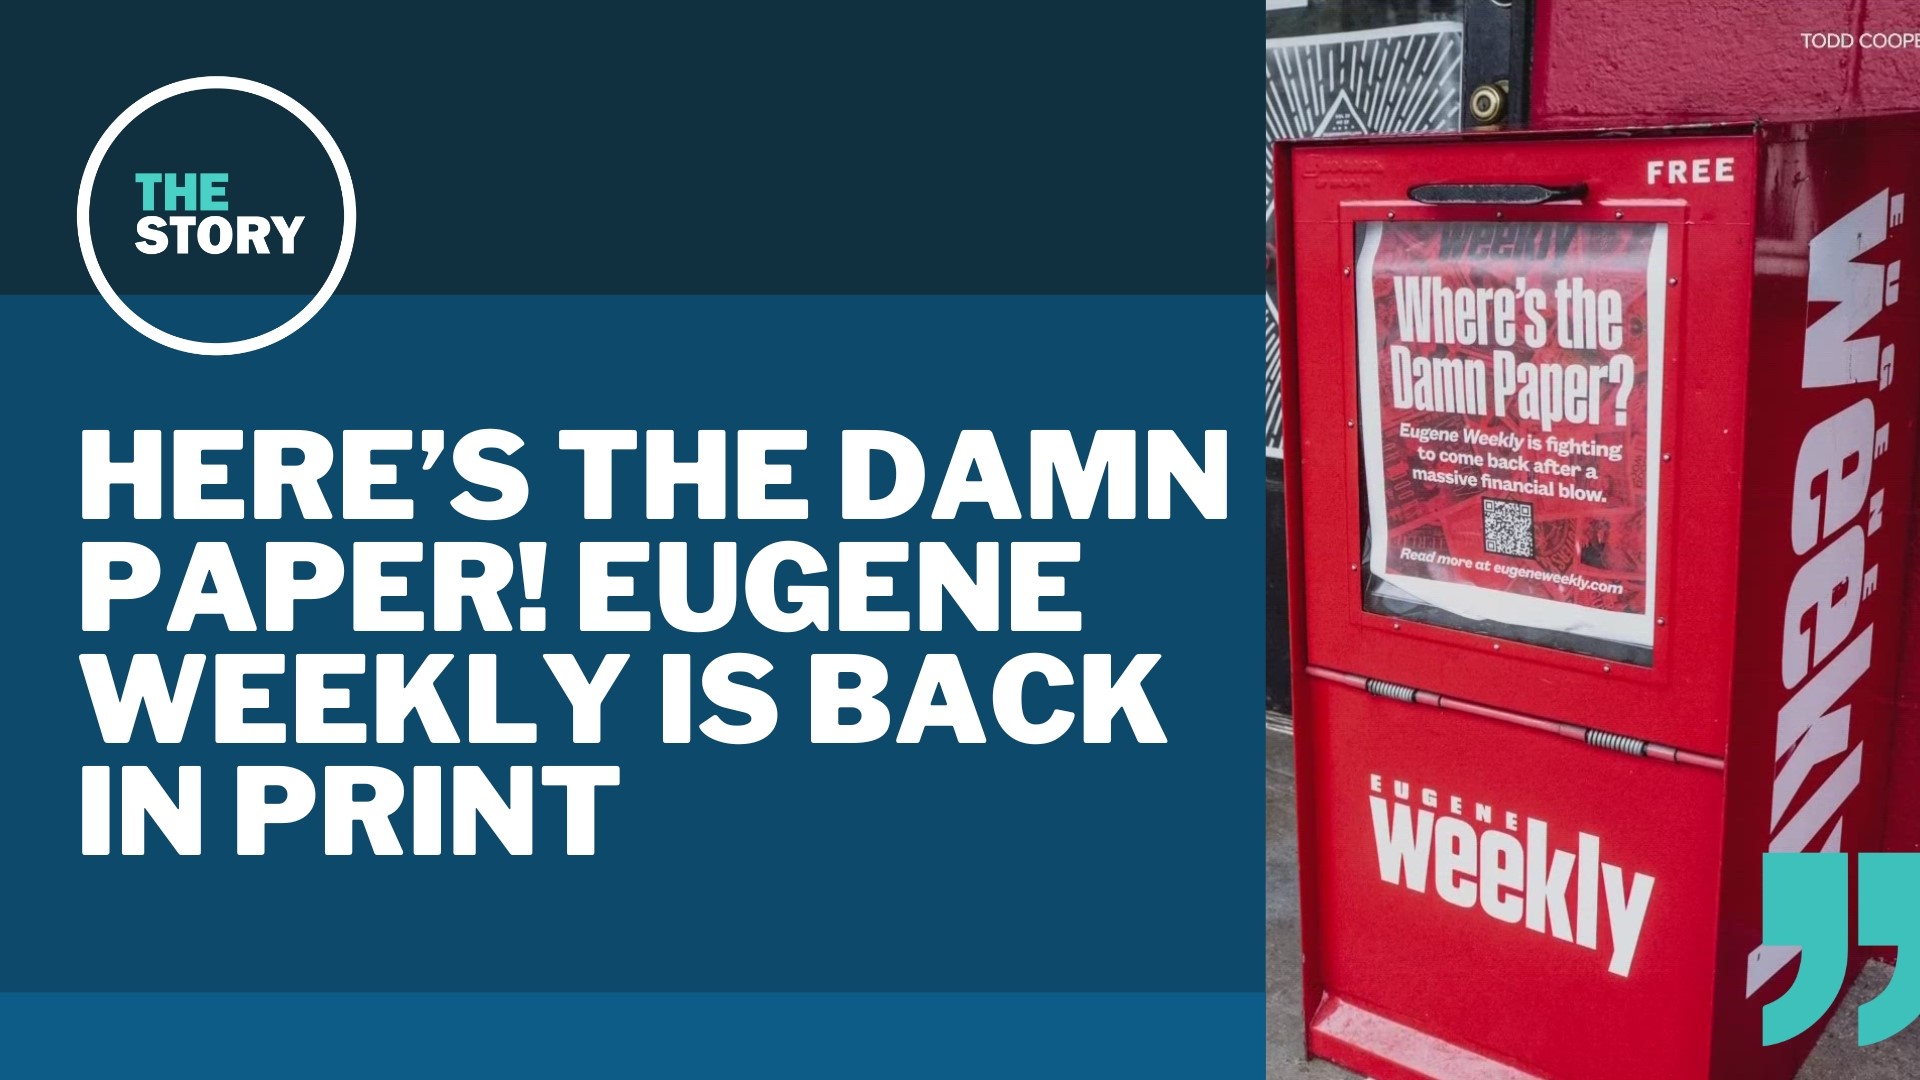 You may recall that the Eugene Weekly had to stop the presses after an employee's embezzlement left them in debt. Now they're starting to make a comeback.